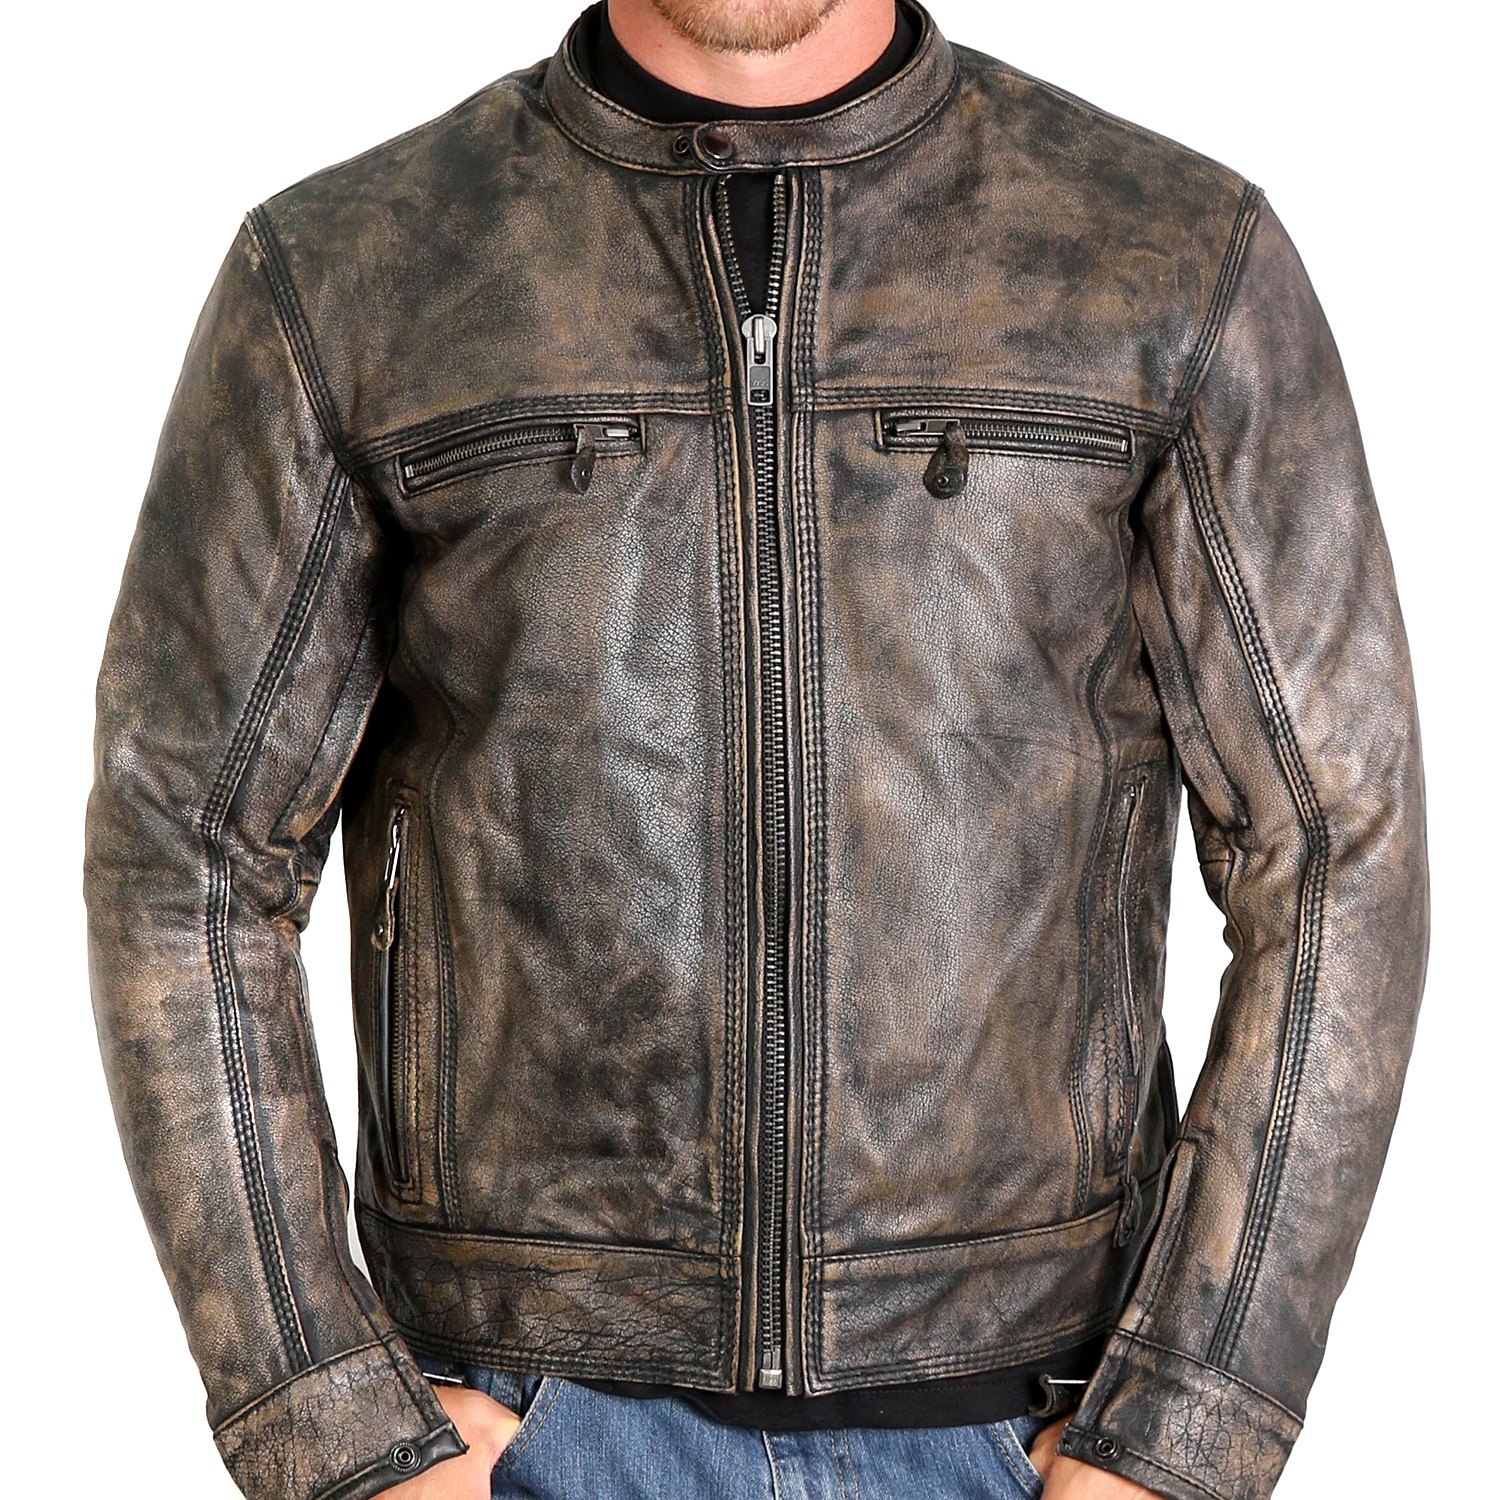 Hot Leathers® - Distressed Men's Leather Jacket - MOTORCYCLEiD.com